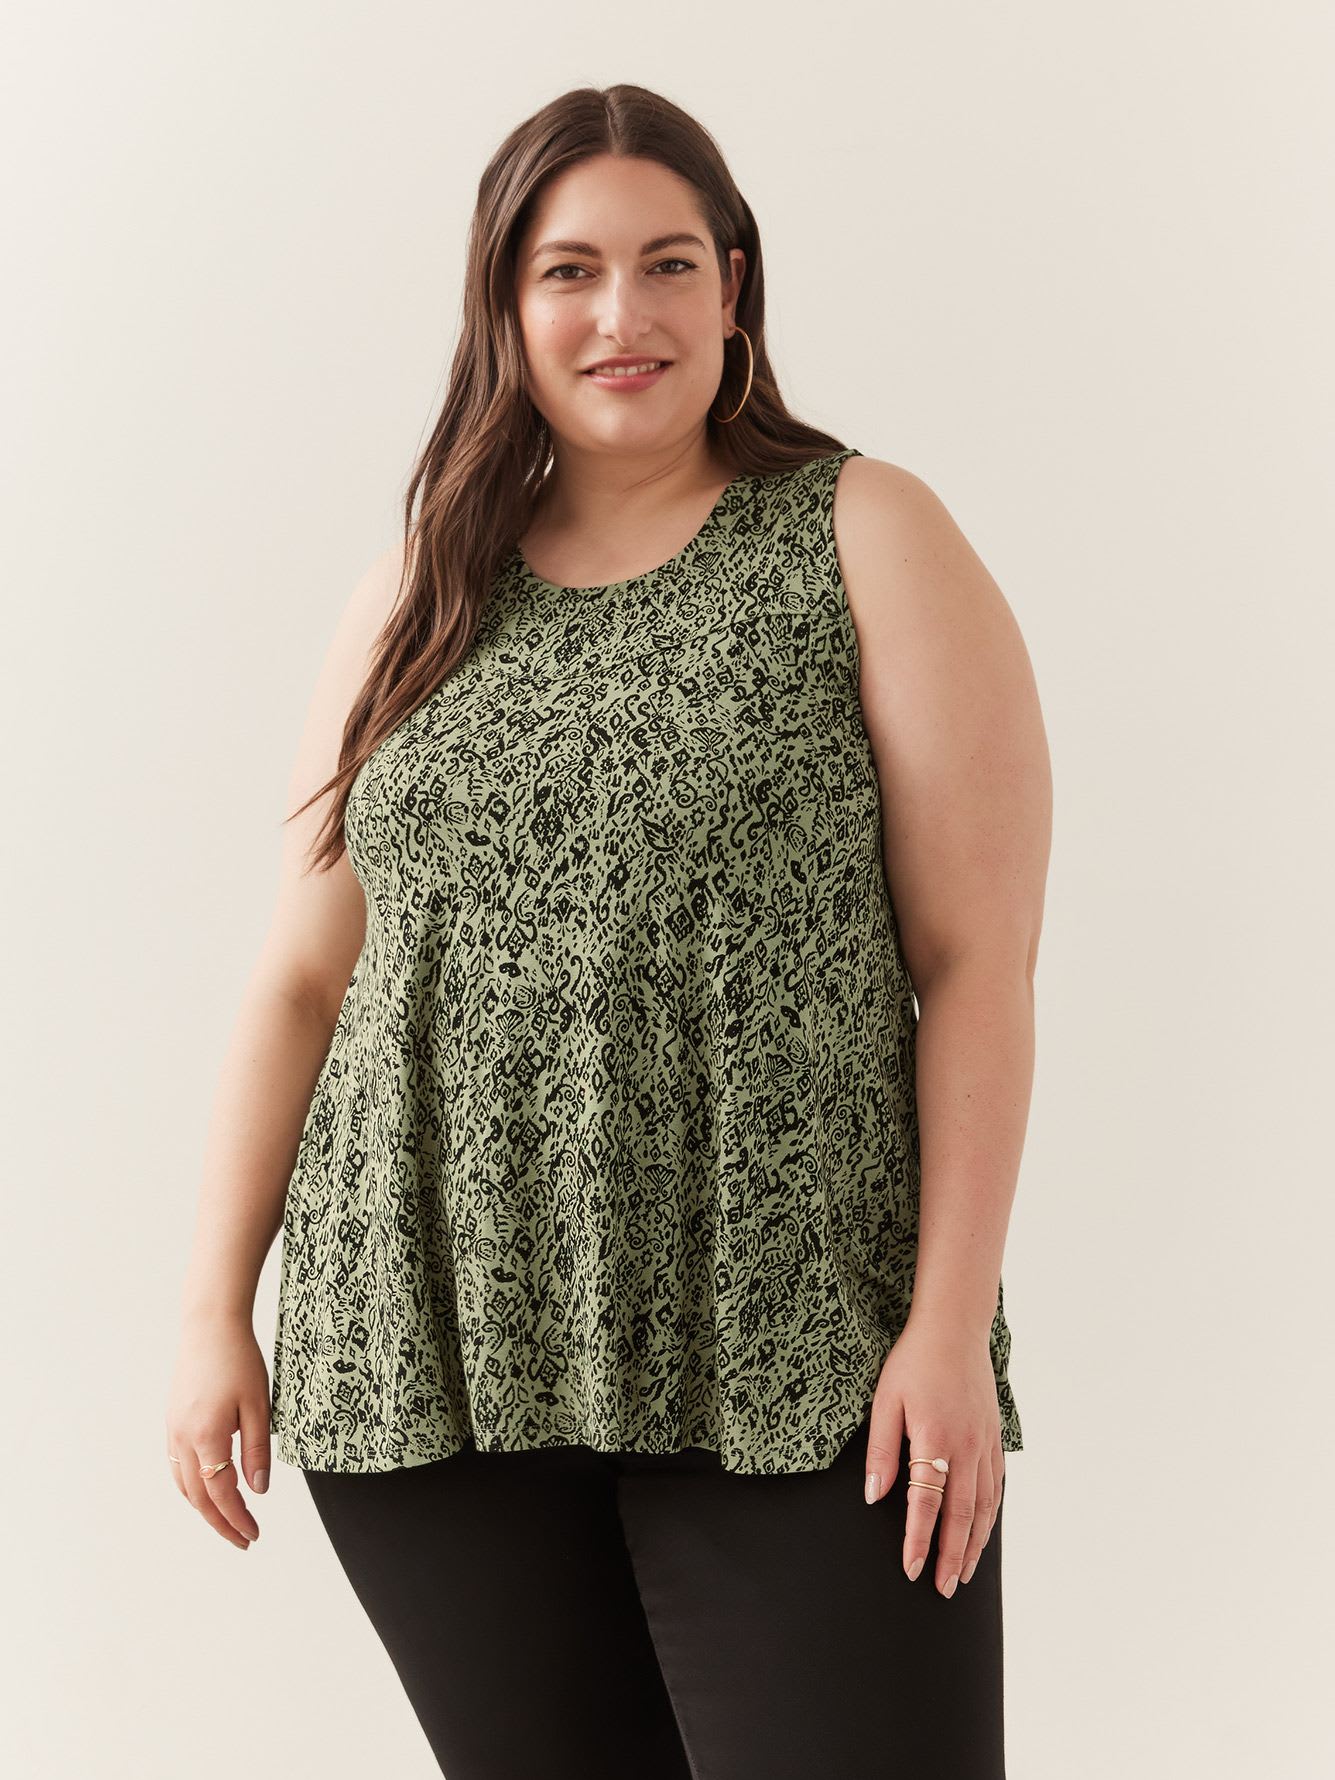 Responsible, Printed Sleeveless Top with Sweetheart Cut